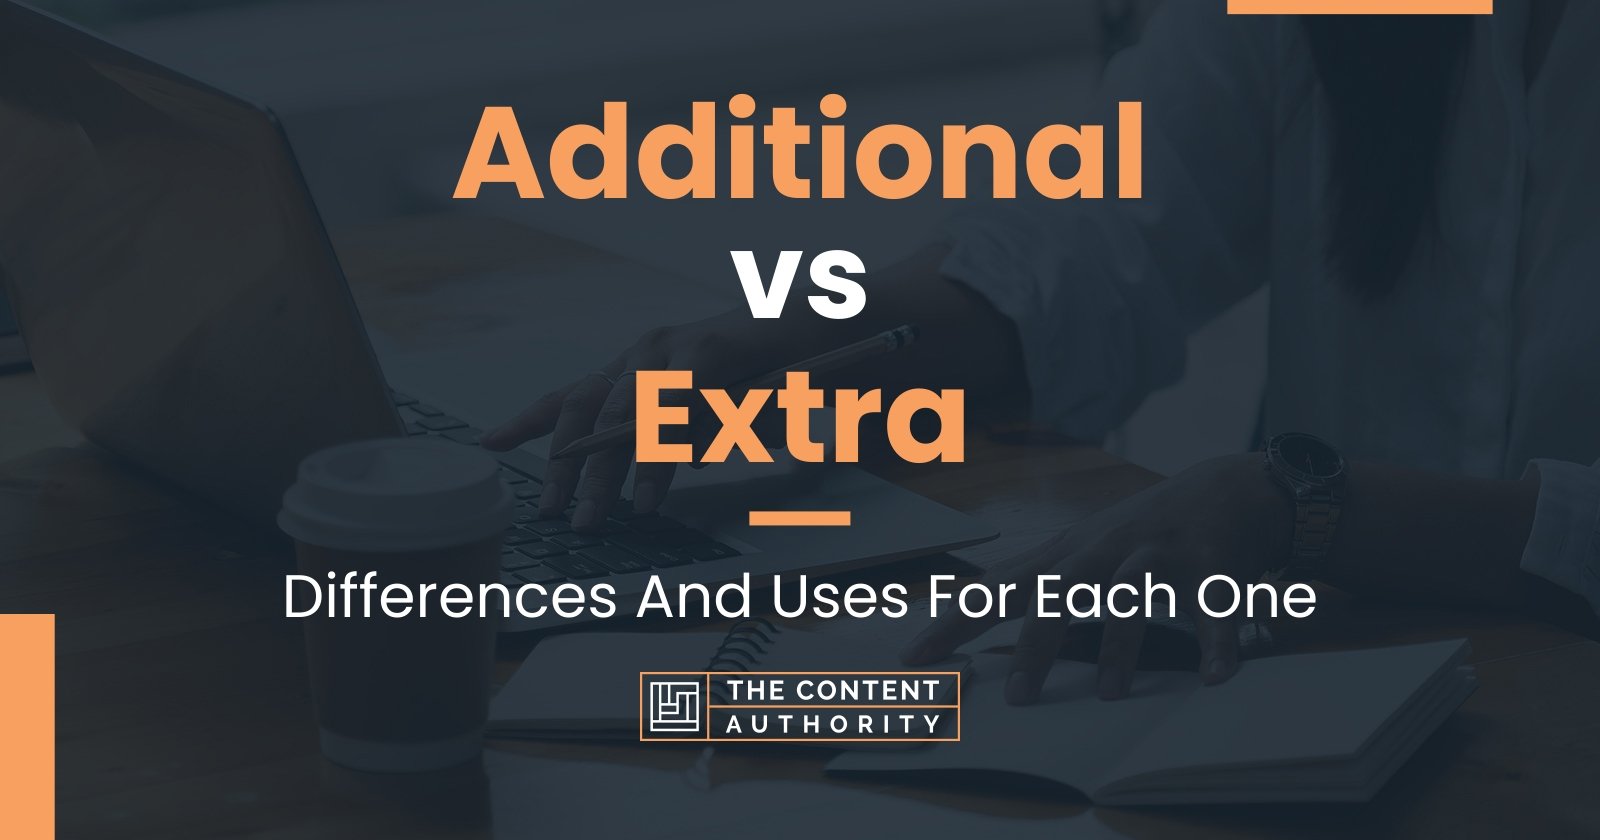 Additional vs Extra: Differences And Uses For Each One